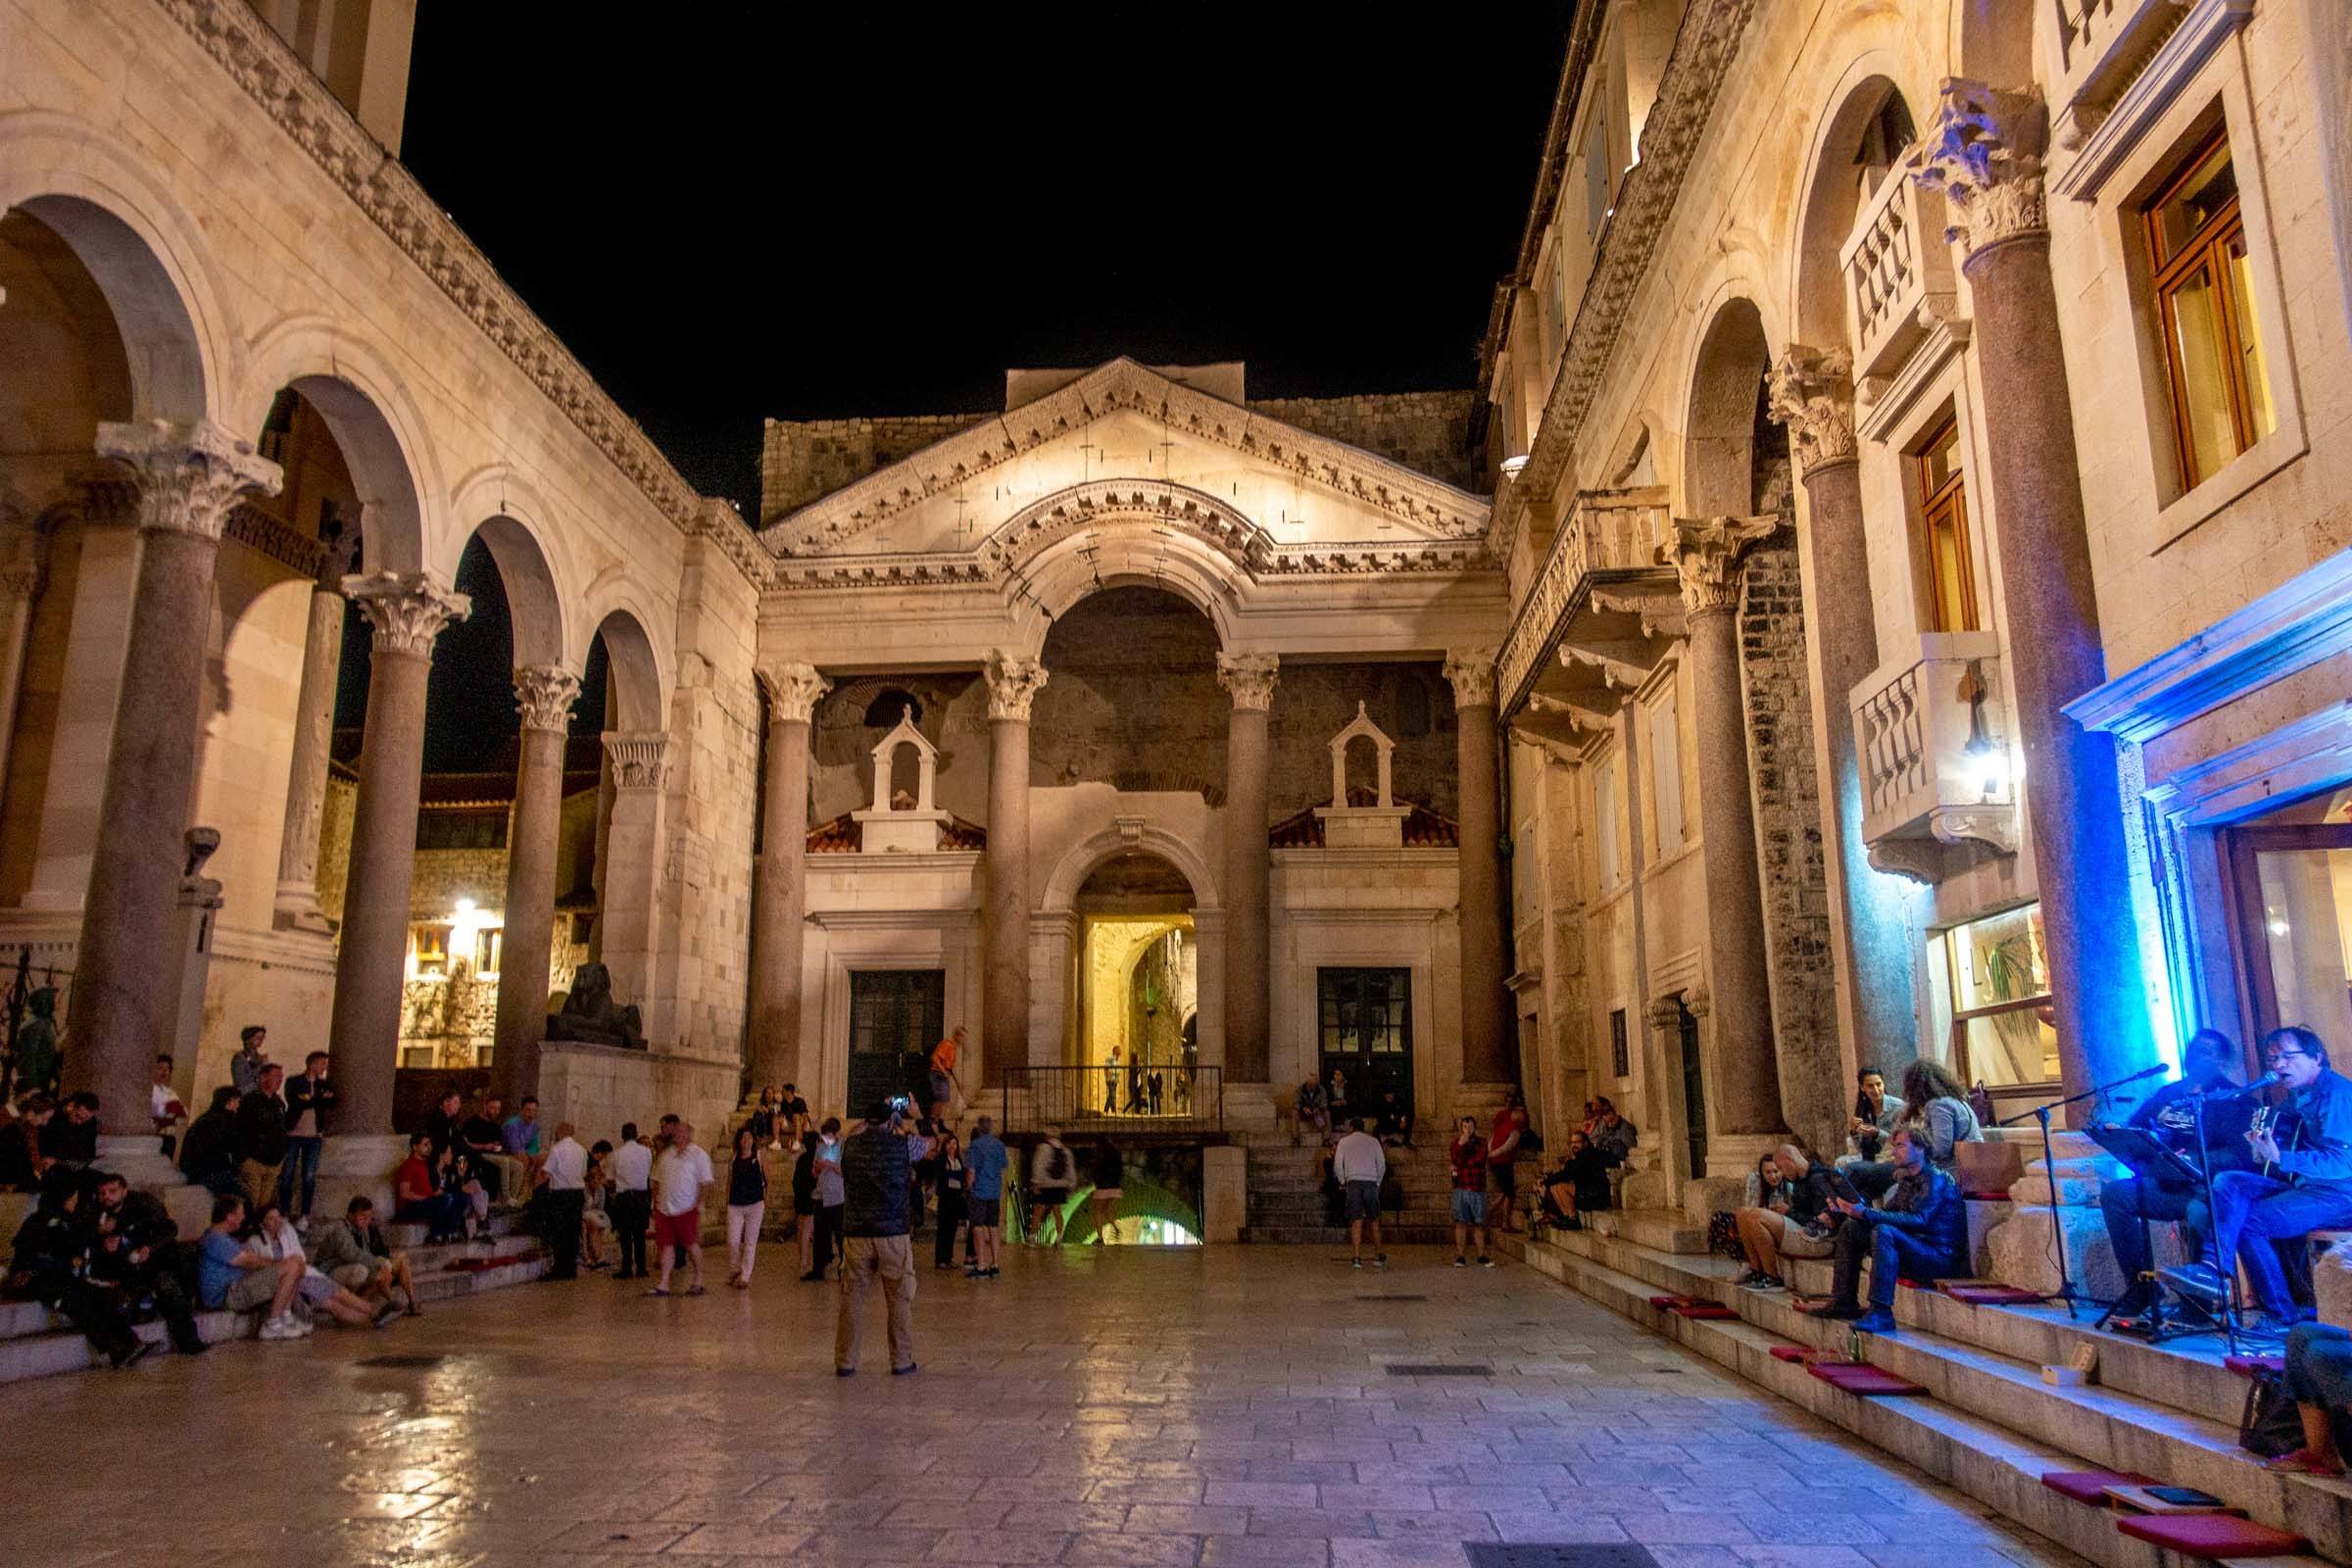 Marble peristyle courtyard of Diocletian's Palace filled with people at night